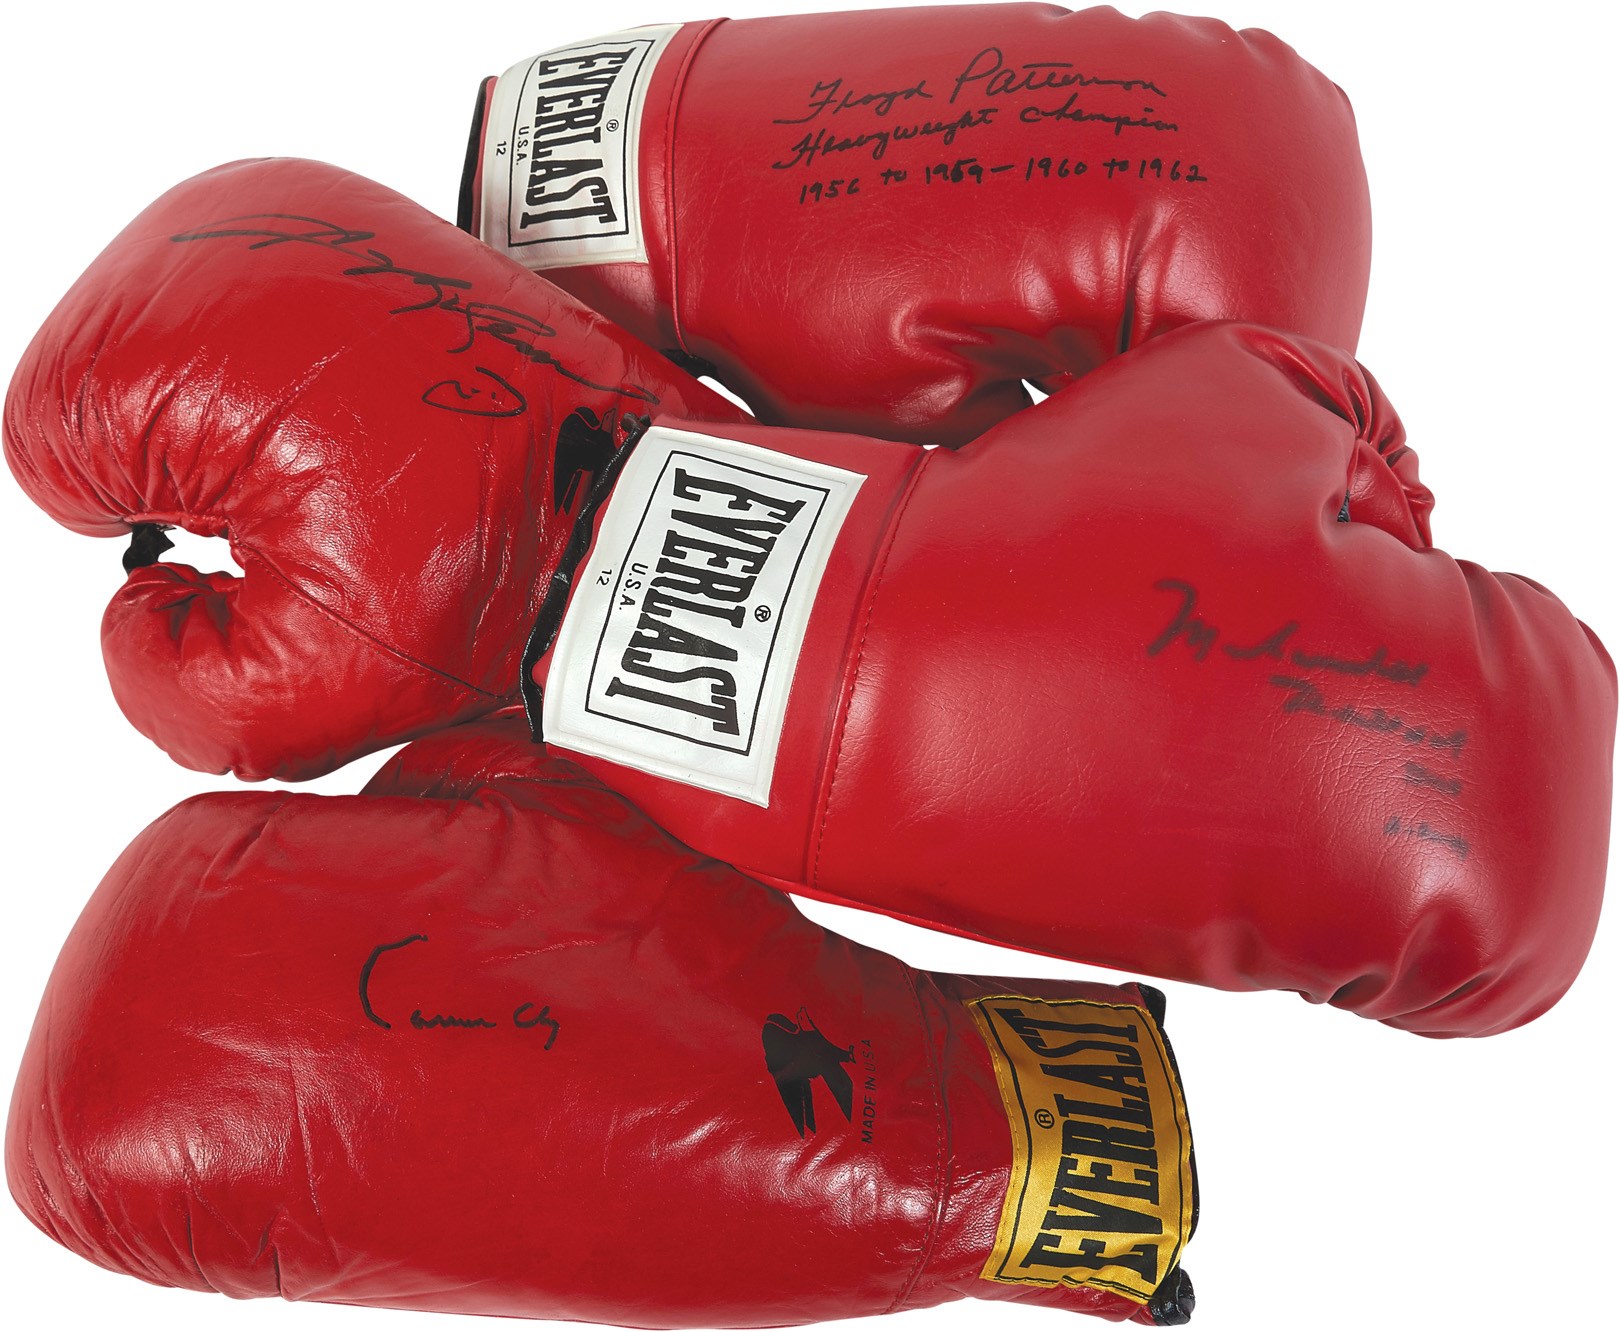 - Cassius Clay, Muhammad Ali, Leonard & Patterson Signed Boxing Gloves